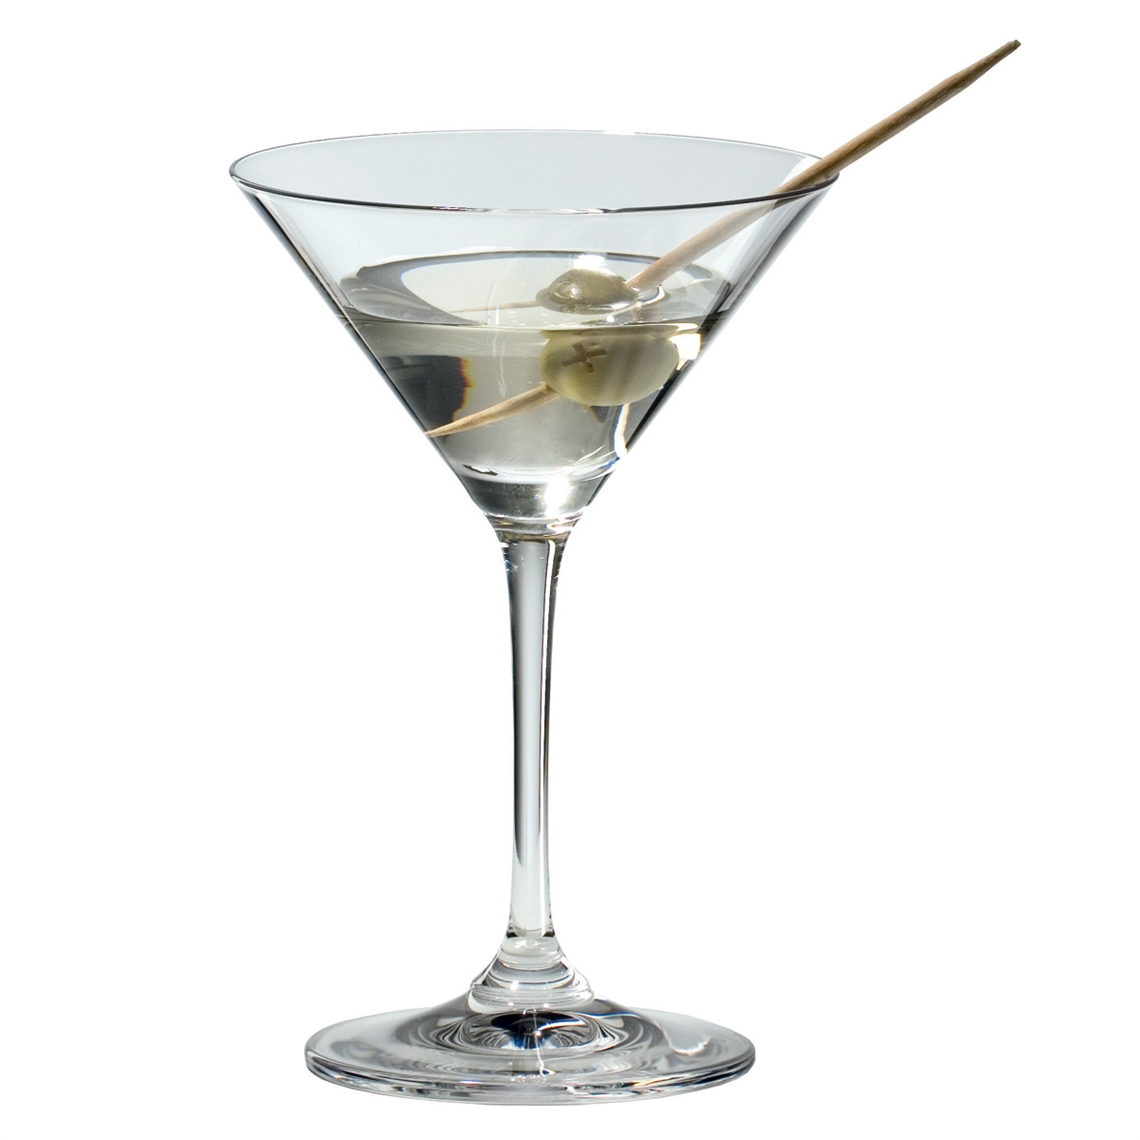 View more riedel sale from our Martini Glasses range